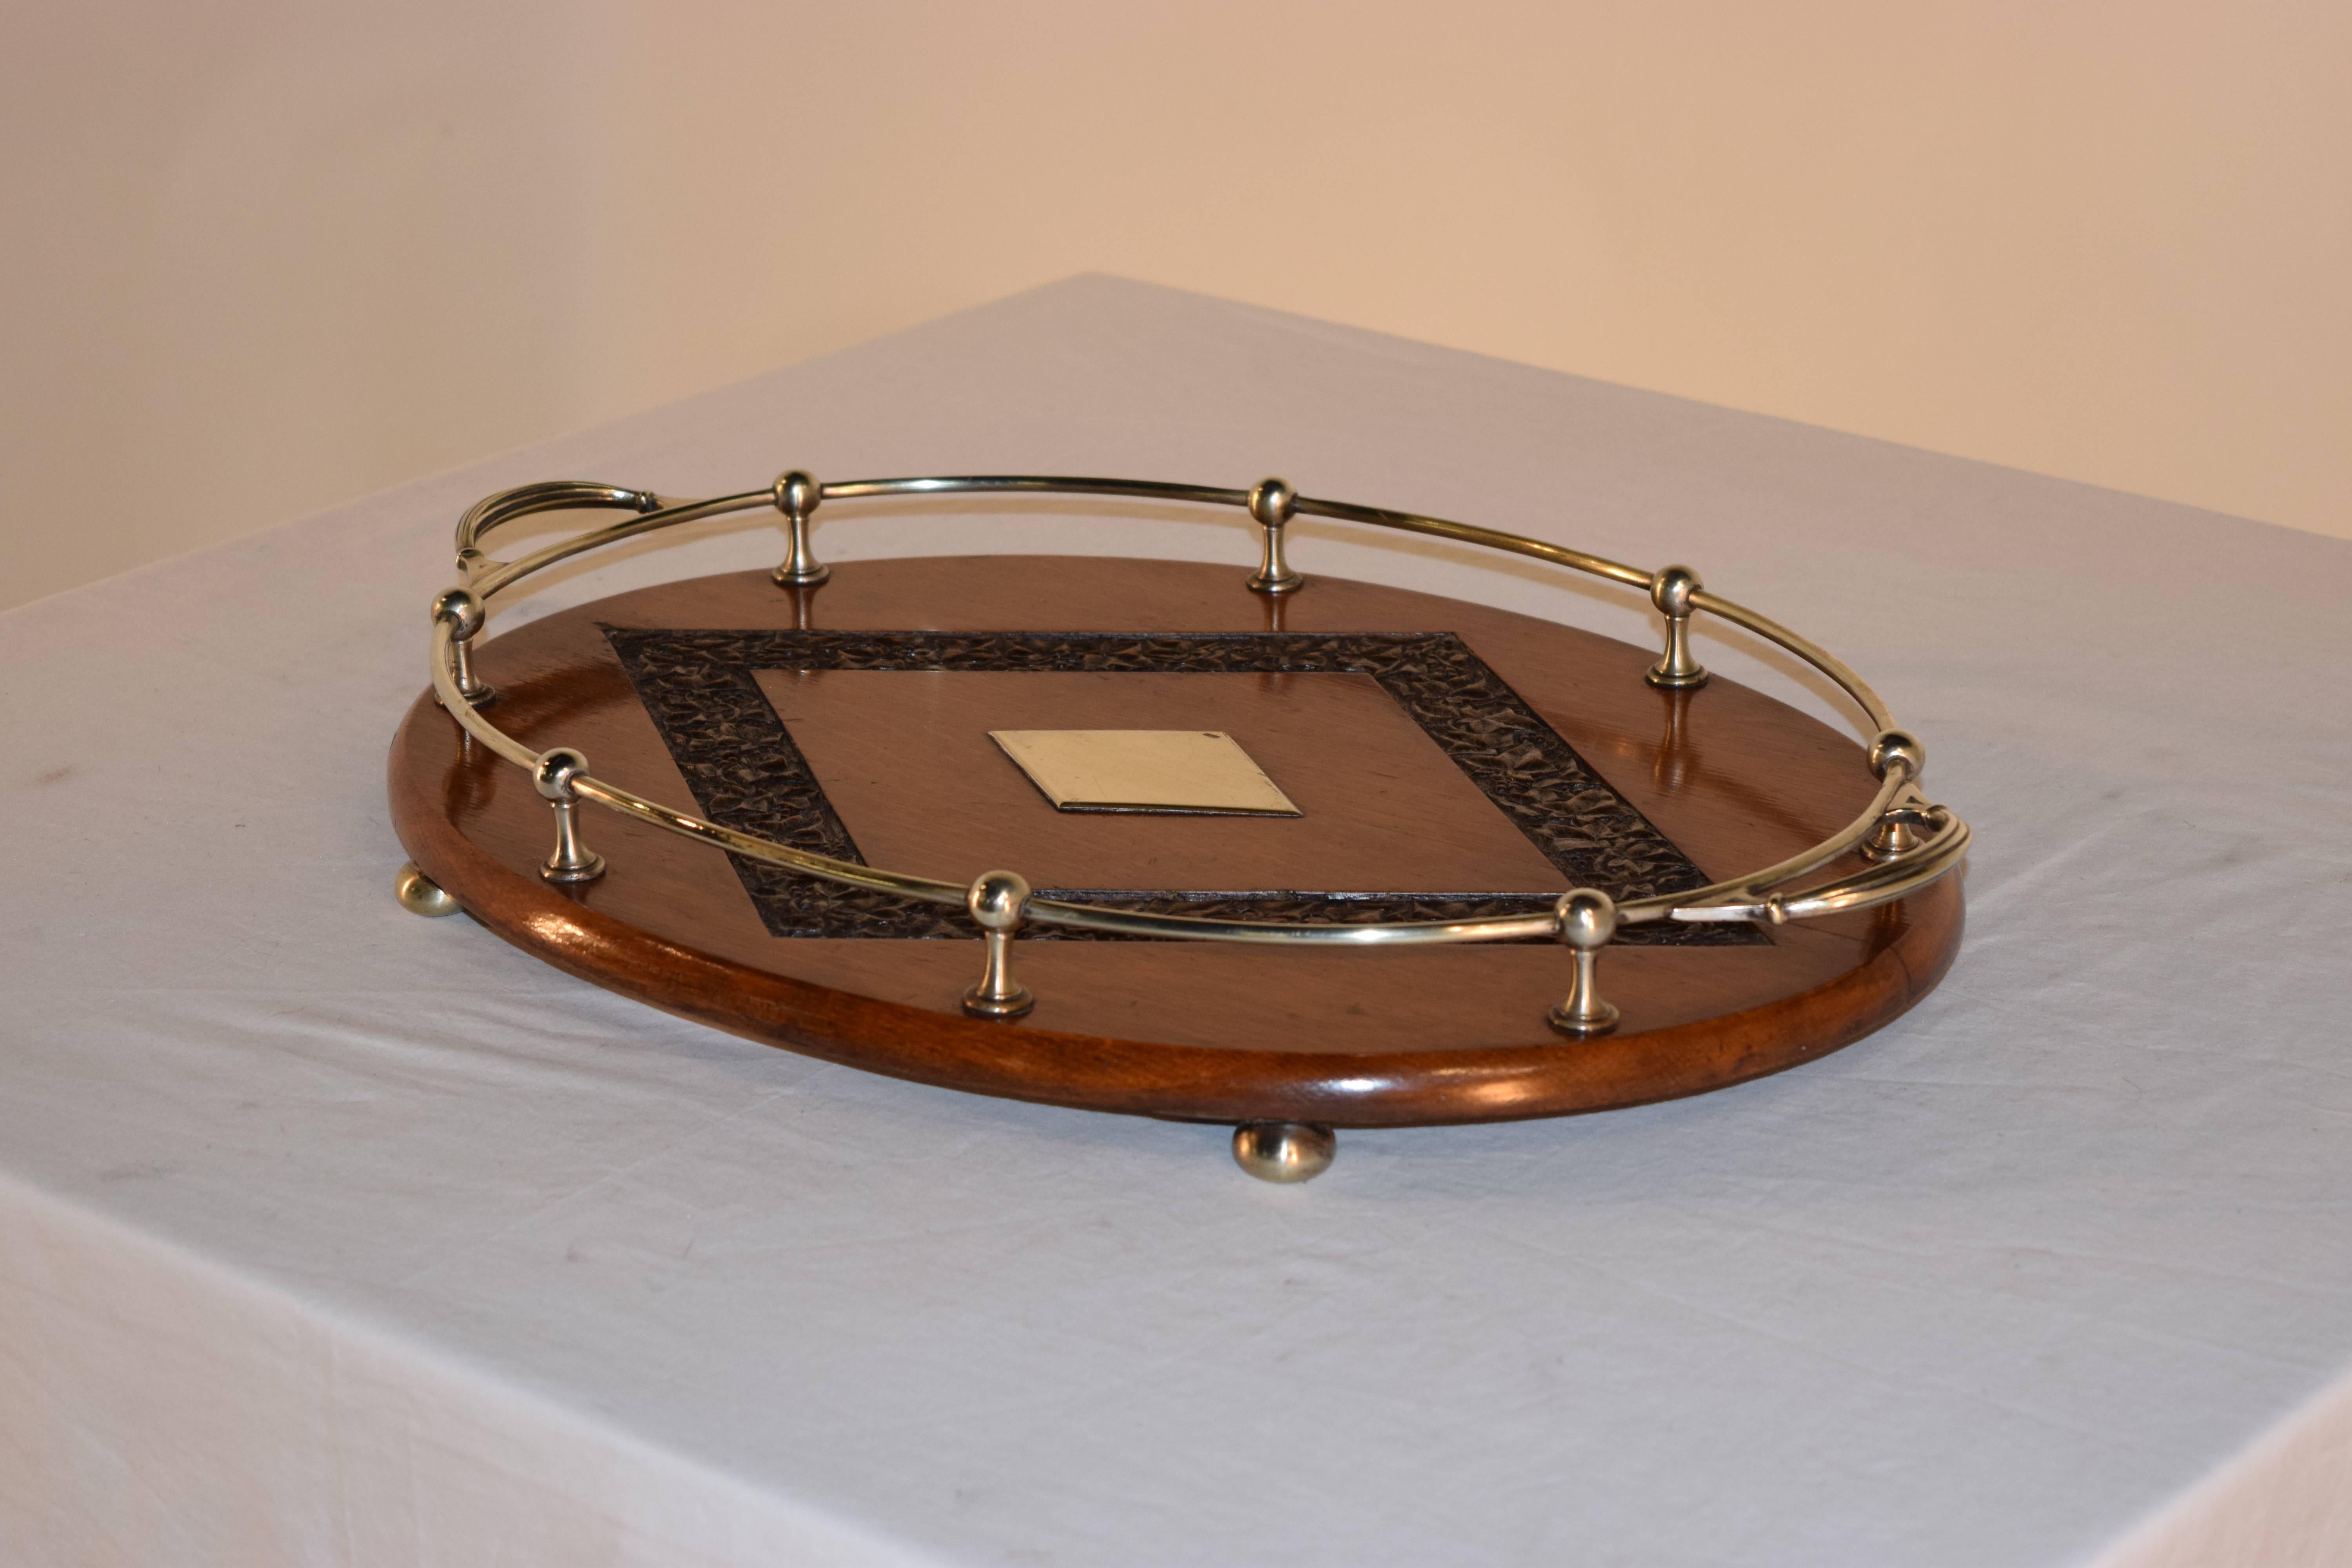 Late 19th century English oak tray with a silver plated gallery and central medallion, surrounded by a hand-carved diamond shaped border. Raised on silver plated bun feet.